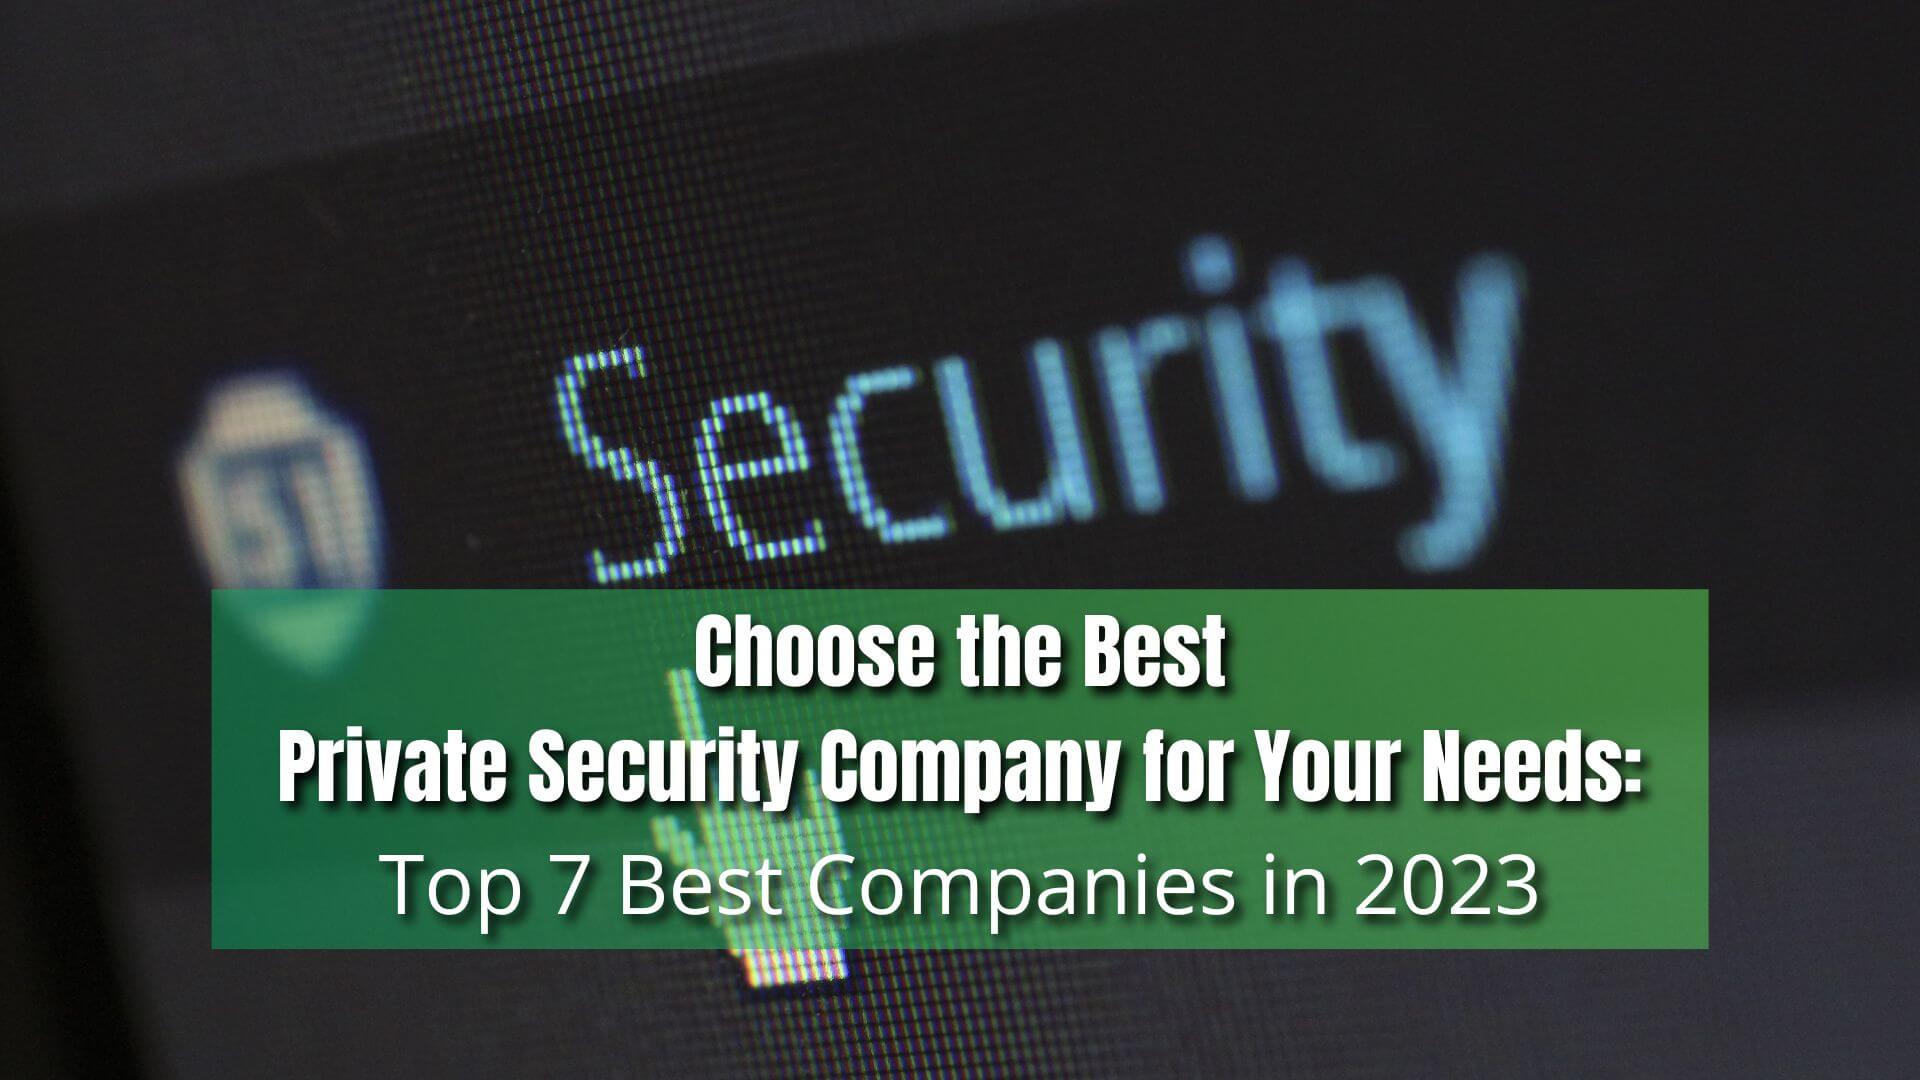 With the rise in crime and insecurity, many individuals seek a private security company. Here's the 7 best private security companies for you.